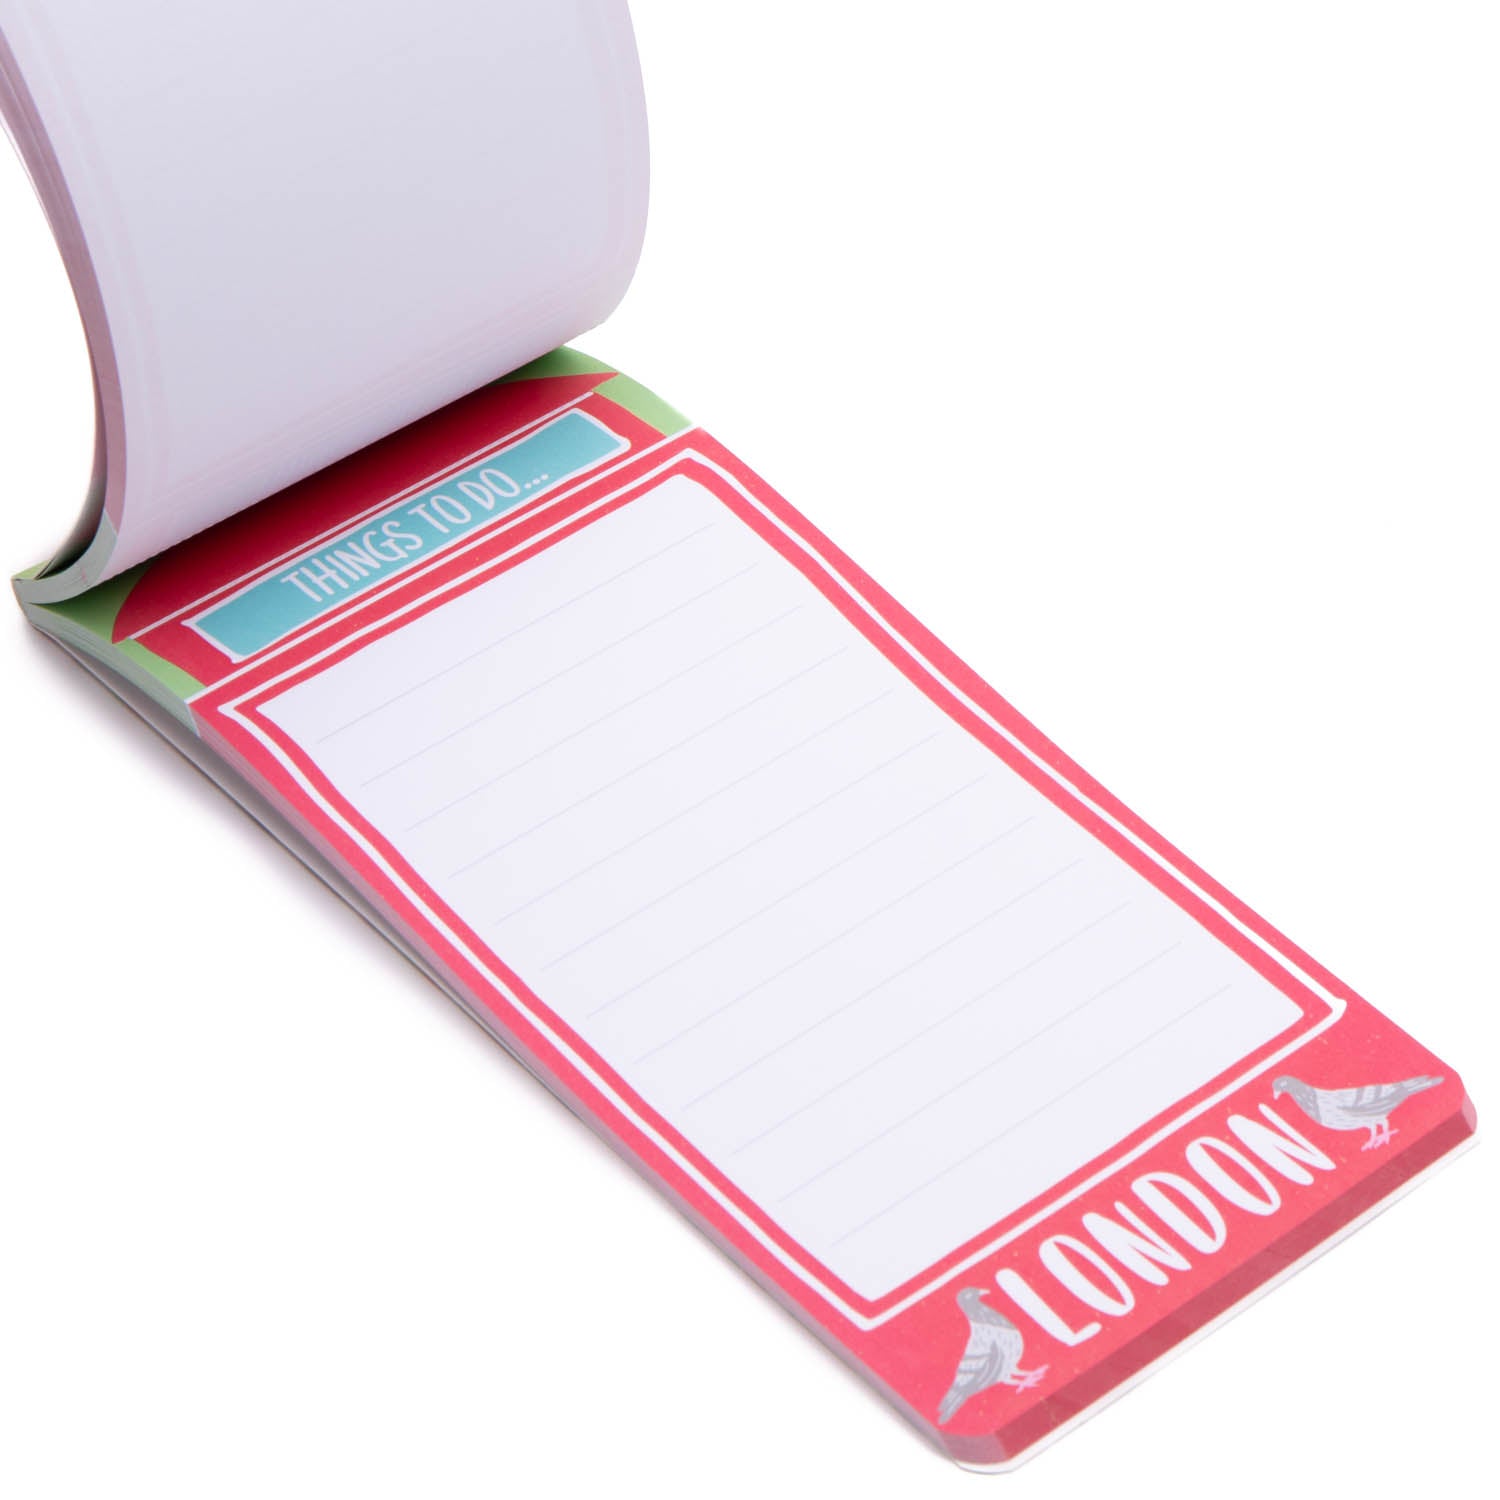 London Adventures Magnetic To Do List Notepad by Milly Green